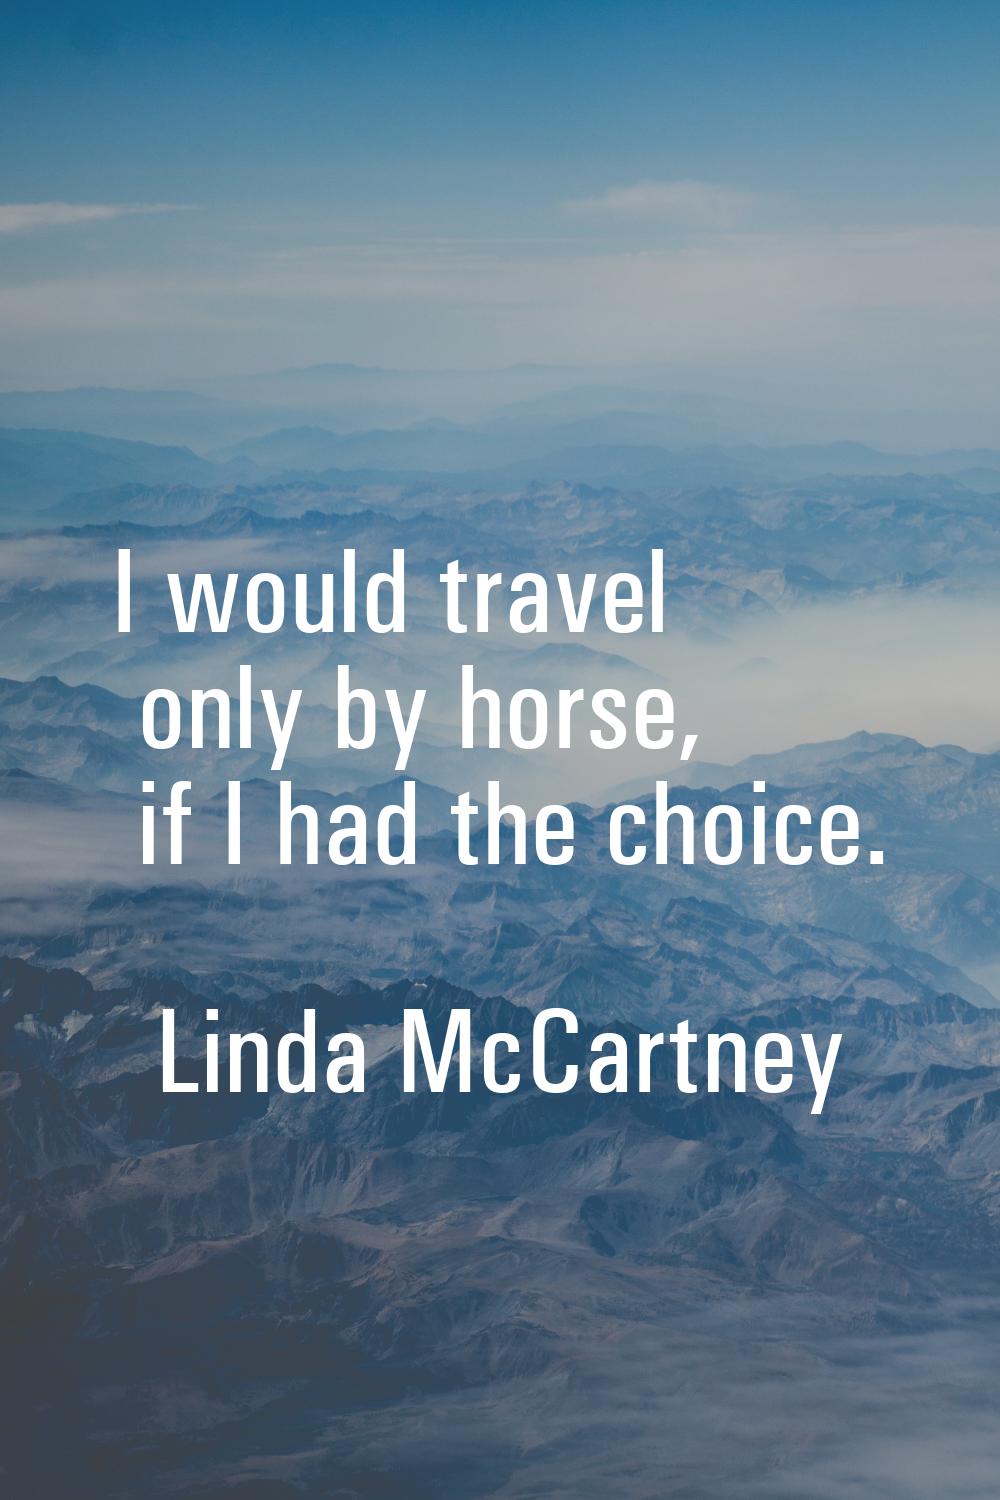 I would travel only by horse, if I had the choice.